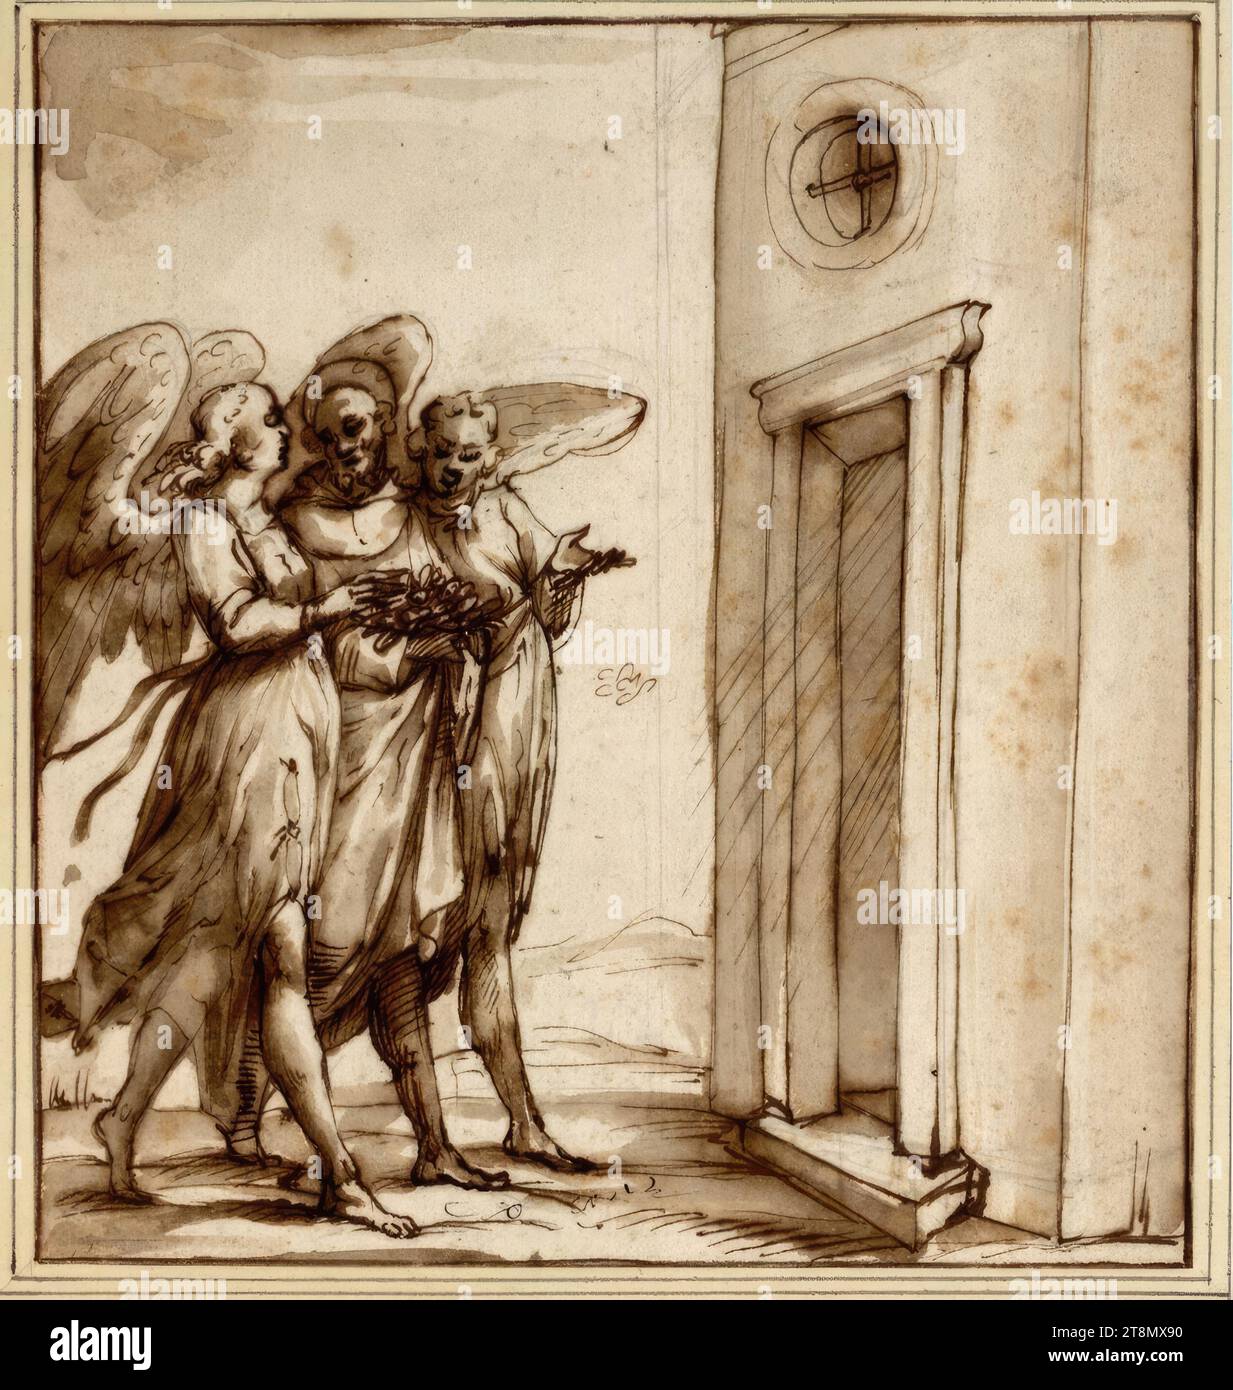 Two angels escort St. Francis into the church with the roses, Domenico Cresti called Passignano (Badia a Passignano (Tavarnelle Val di Pesa) 1559 - 1638 Florence), drawing, pen, ink, wash, 16.2 x 15.2 cm, l.b. Duke Albert of Saxe-Teschen Stock Photo